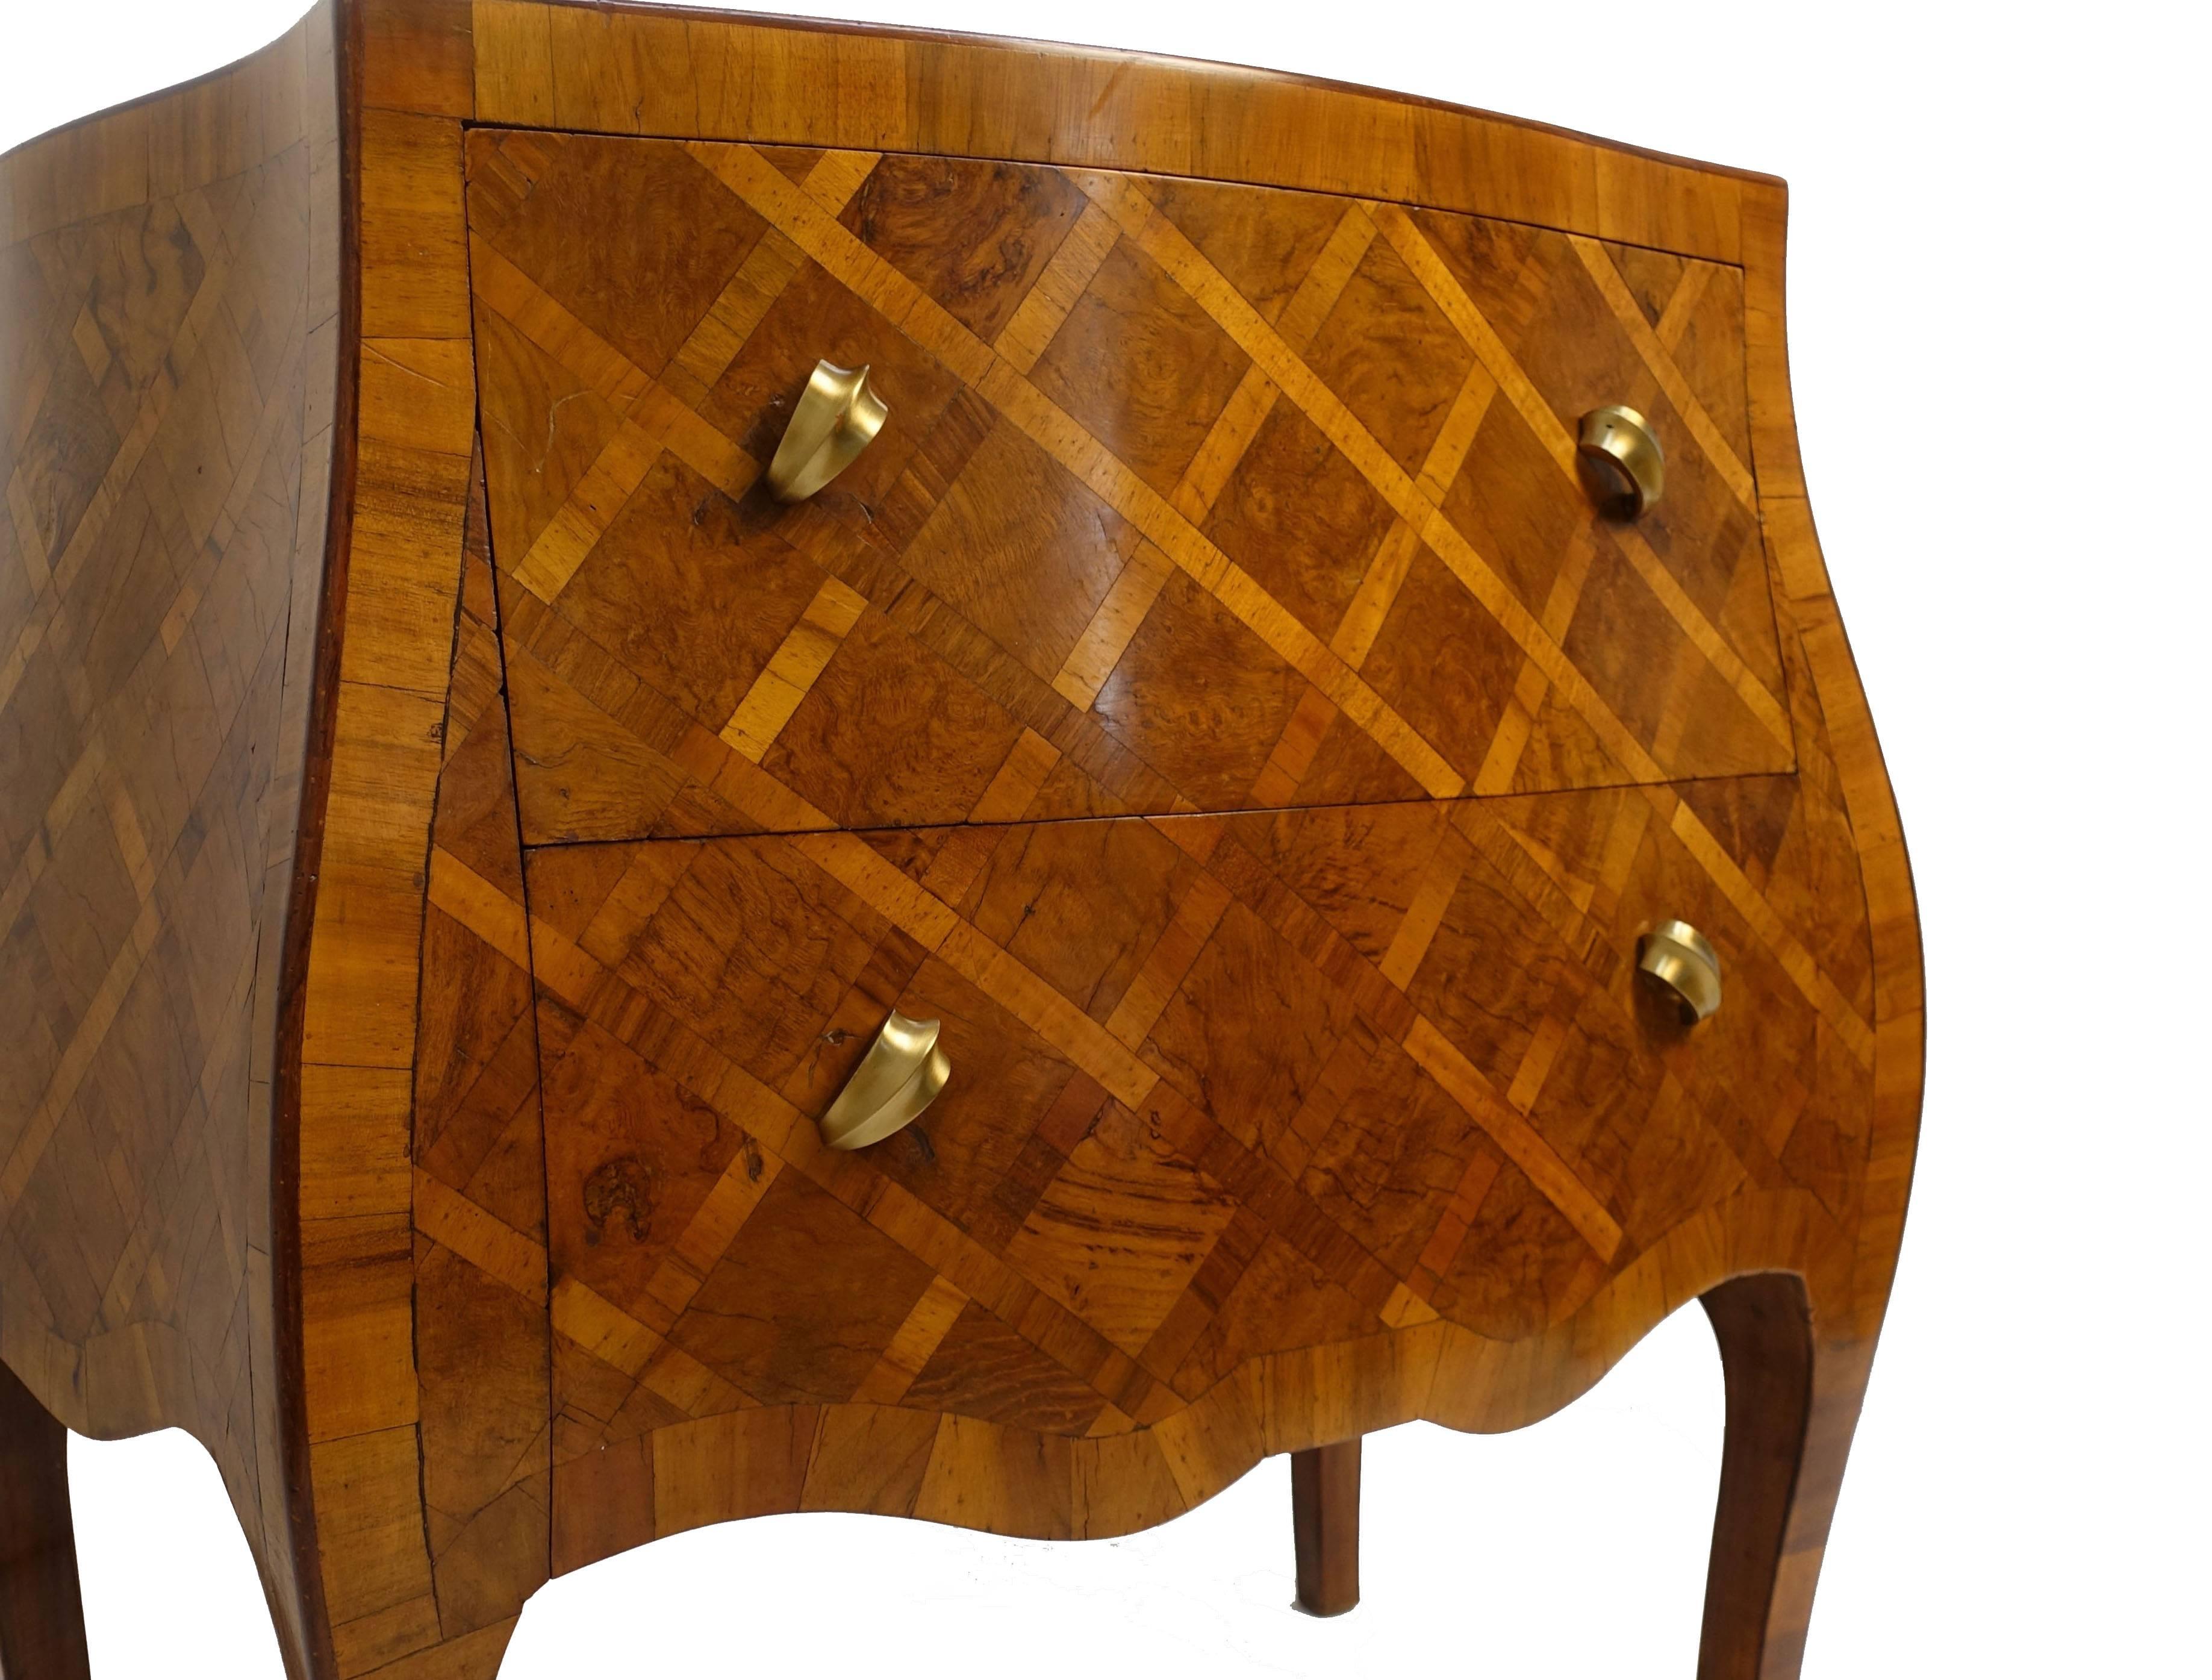 Beautiful figured olivewood two-drawer bombe parquetry commode with inlaid cross hatch lattice design on the top and front, standing on cabriole legs, Italy, circa 1960.